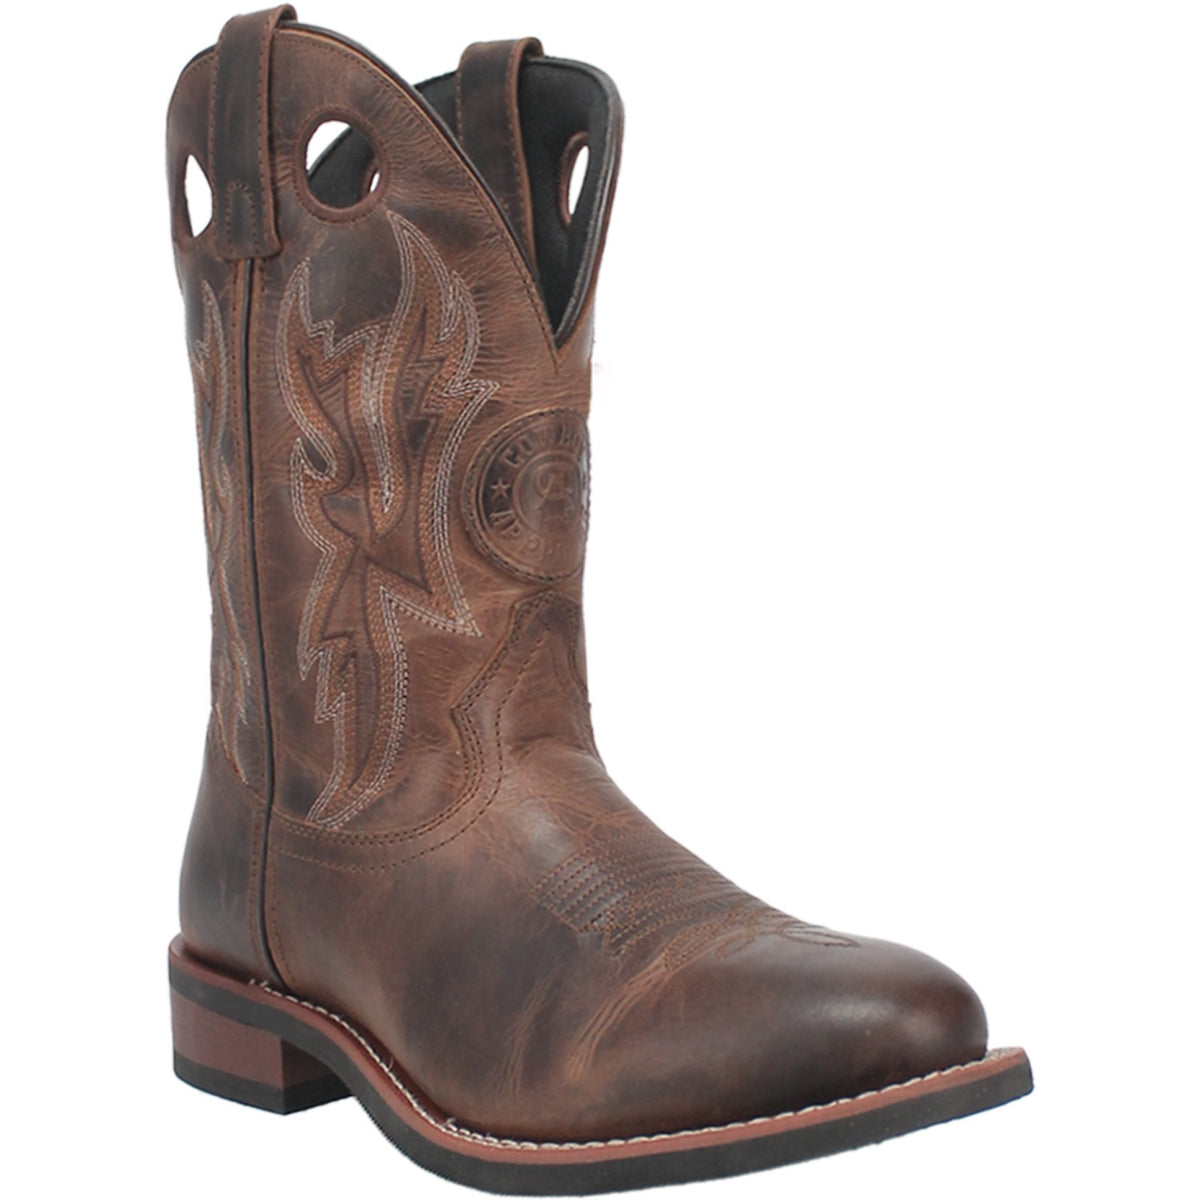 DAWSON LEATHER BOOT Cover